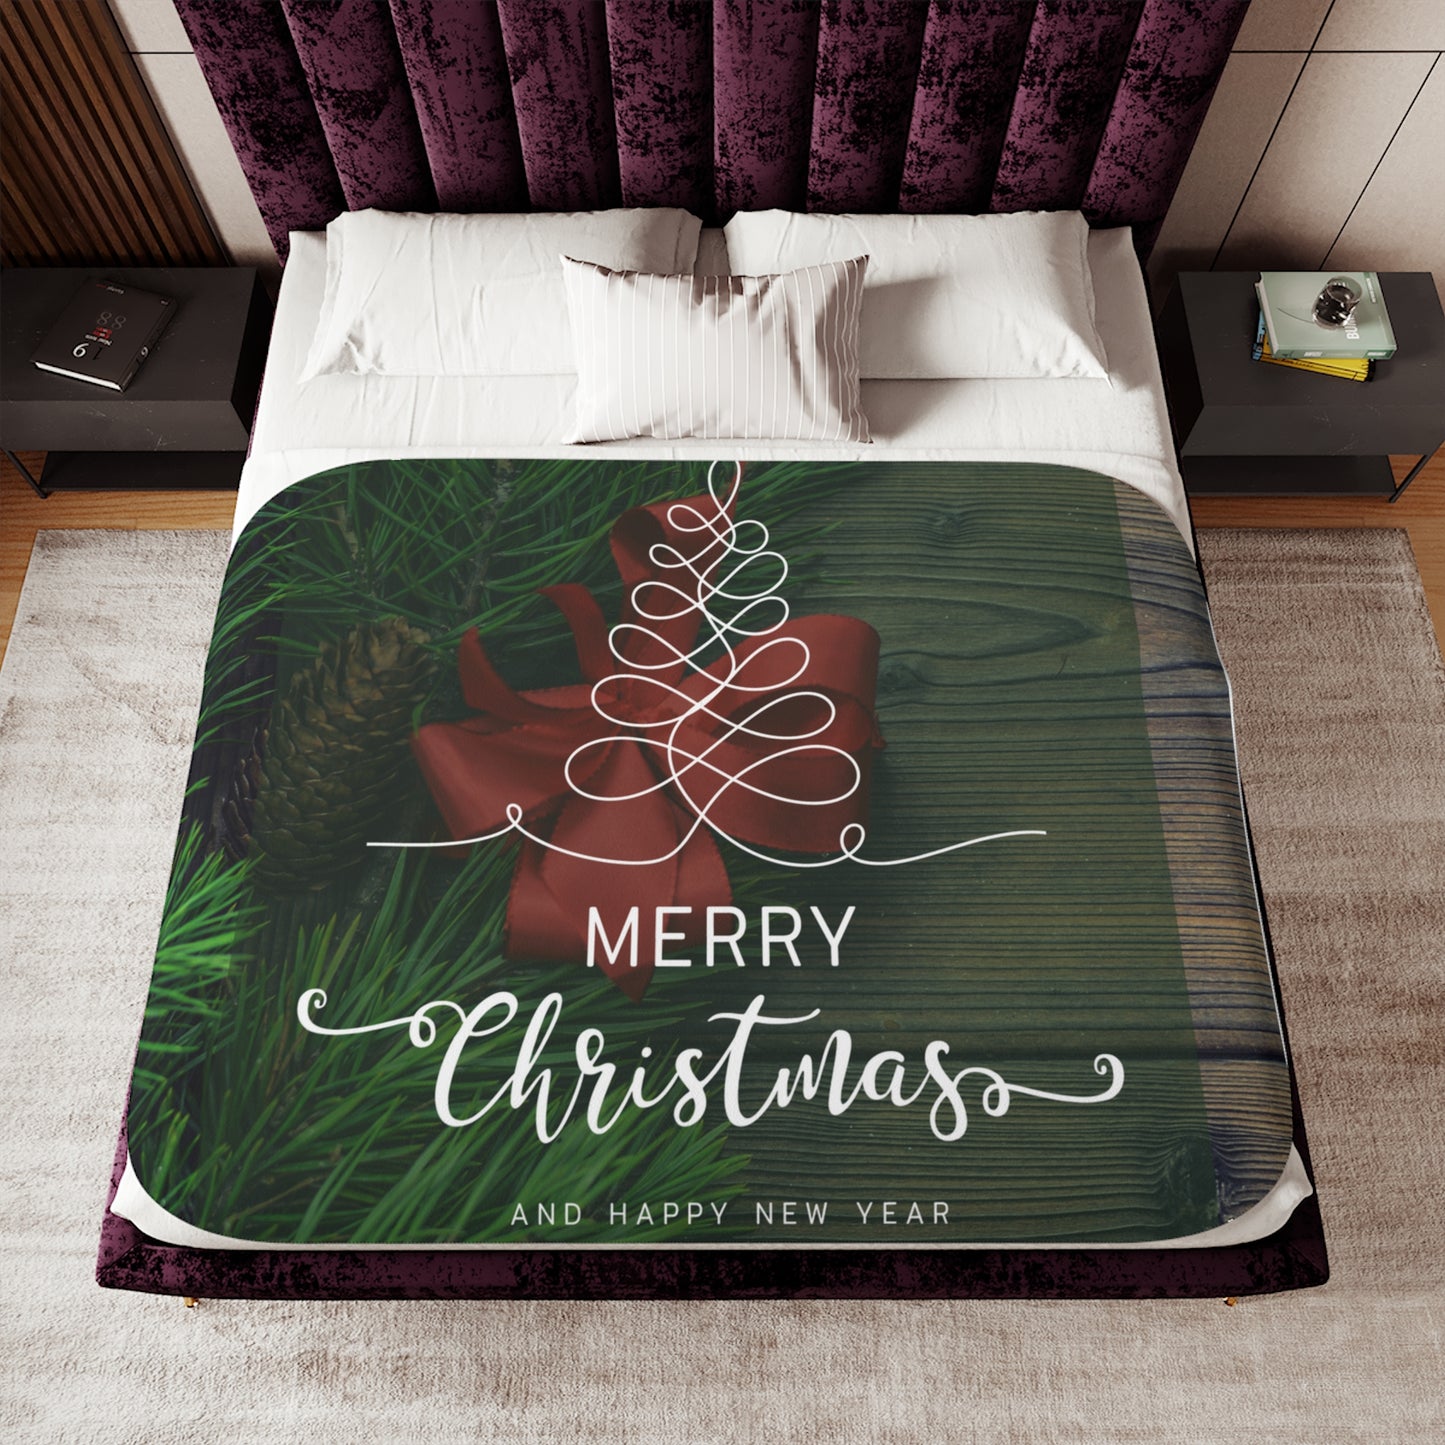 Merry Christmas and Happy New Year Printed Sherpa Blanket, Green